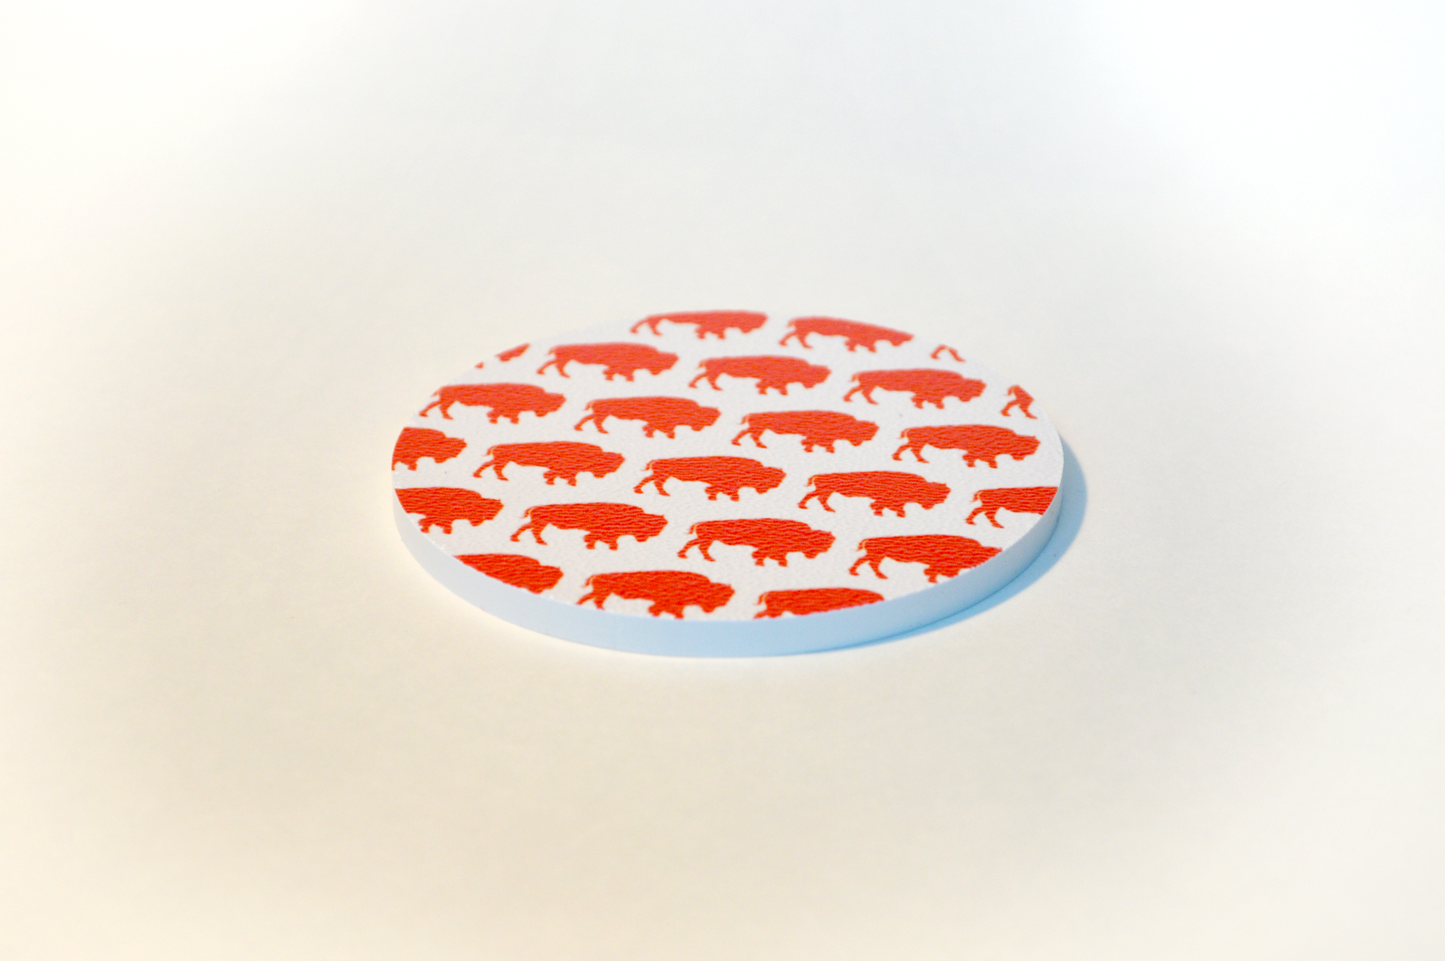 Buffalo White with Red Buffalo Pattern Circle Plastic Coaster 4 Pack Designed and Handcrafted in Buffalo NY